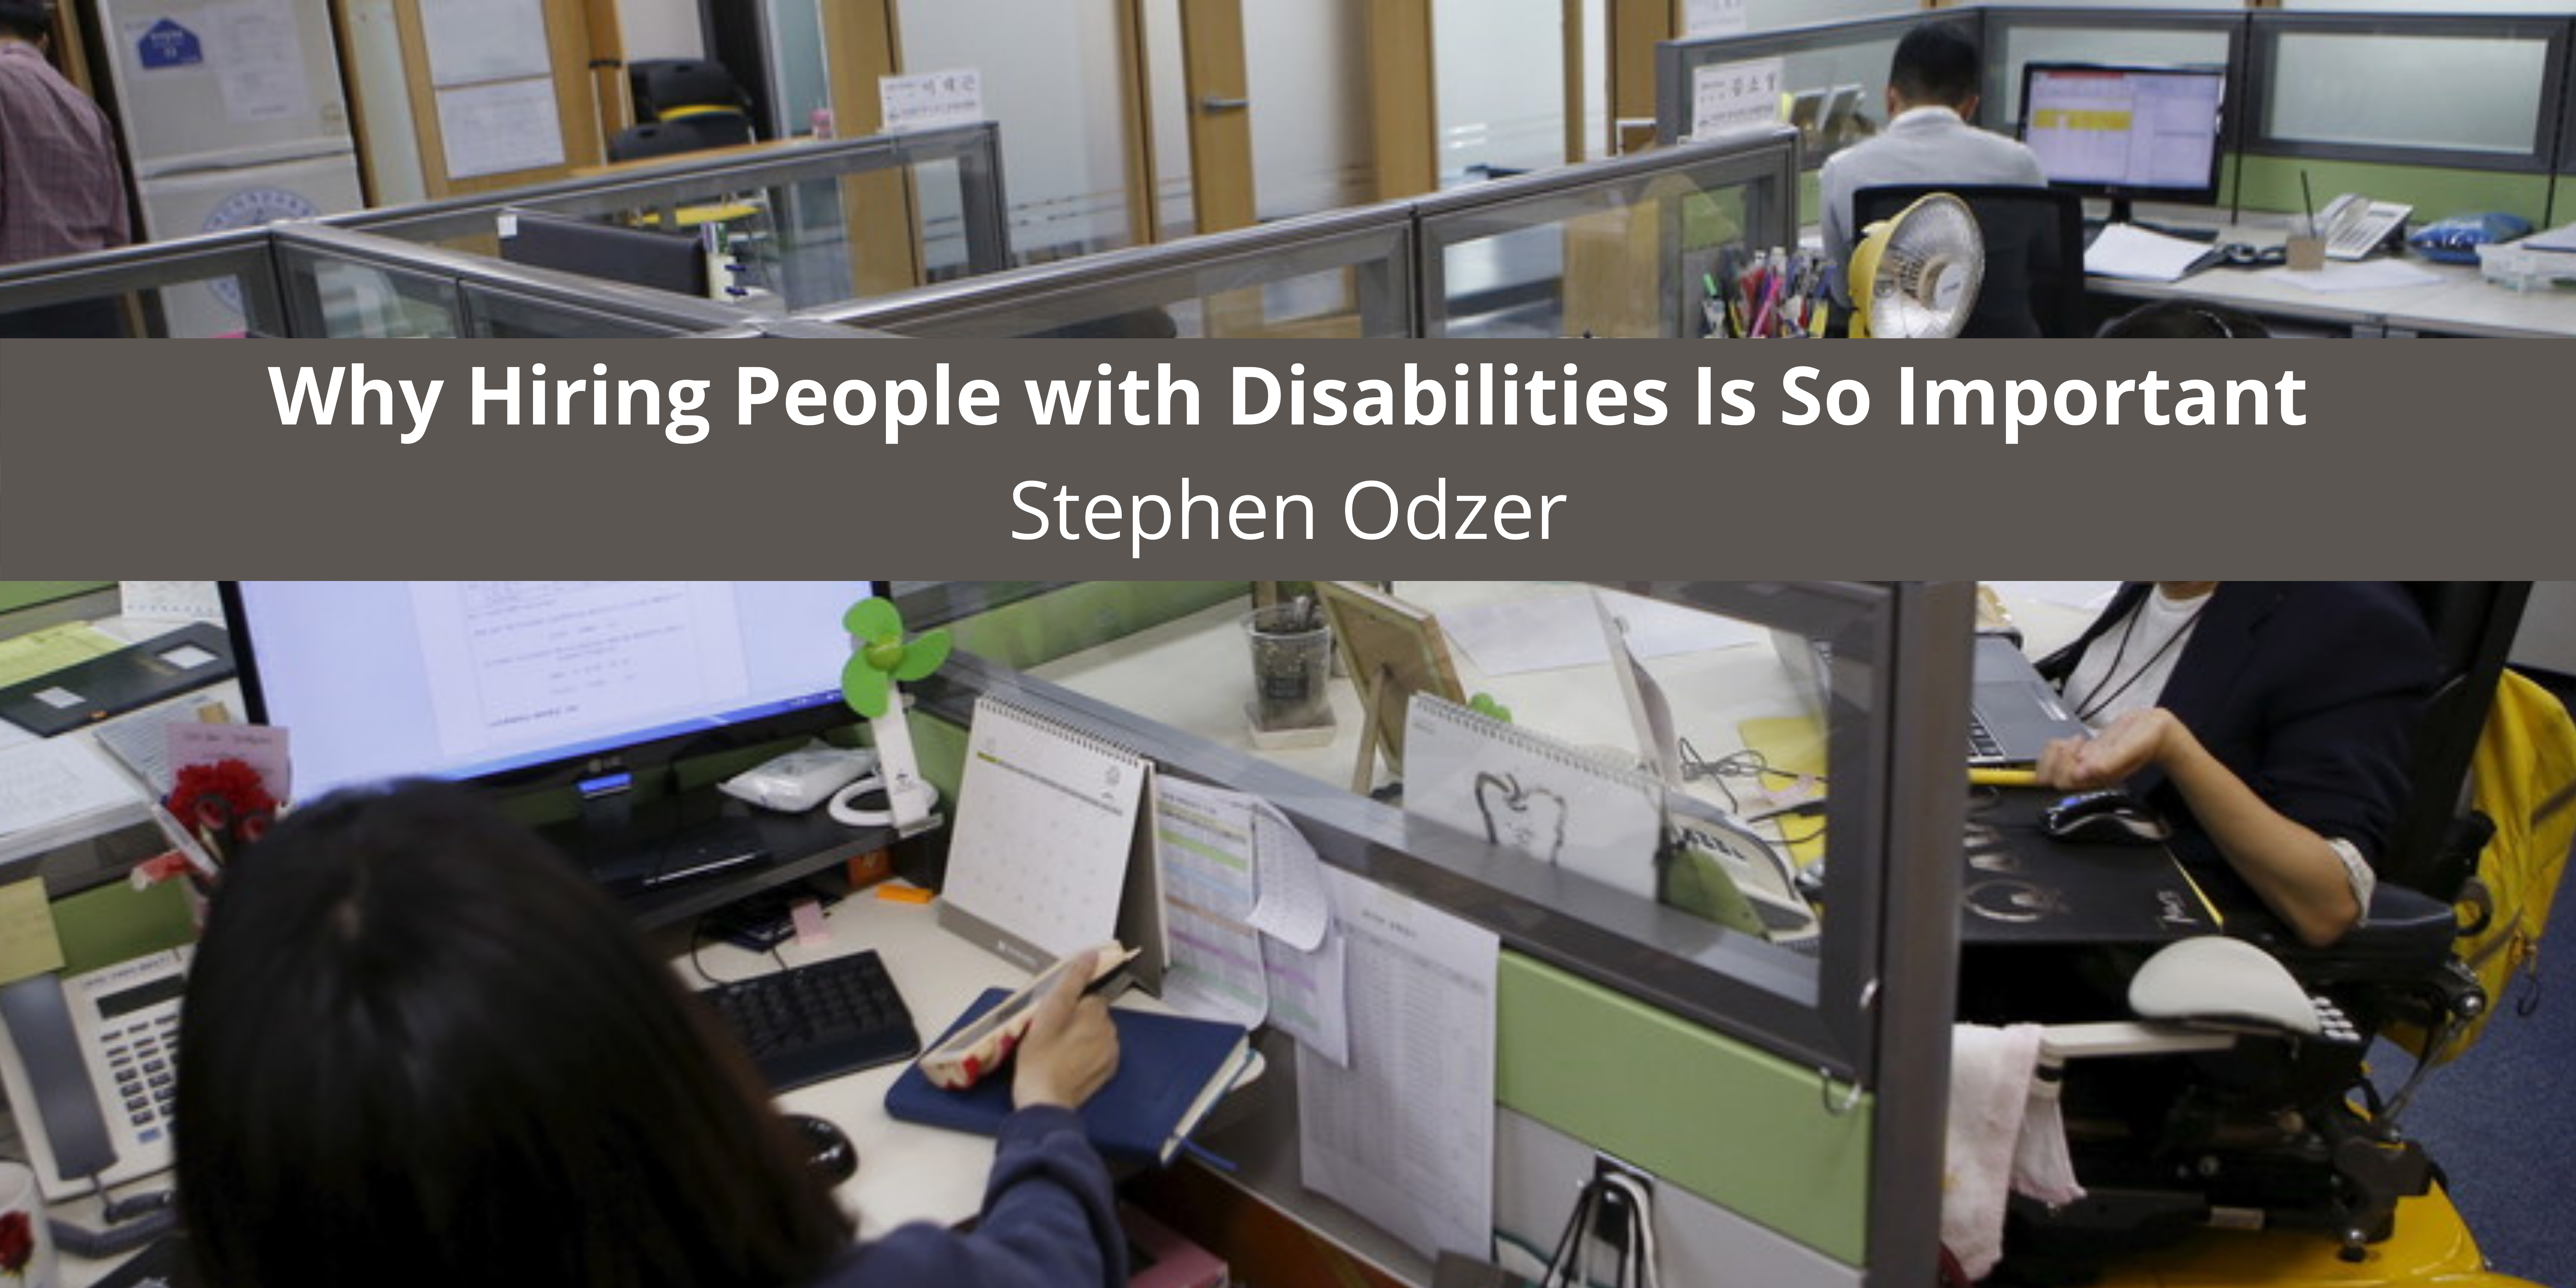 Why Hiring People with Disabilities Is So Important